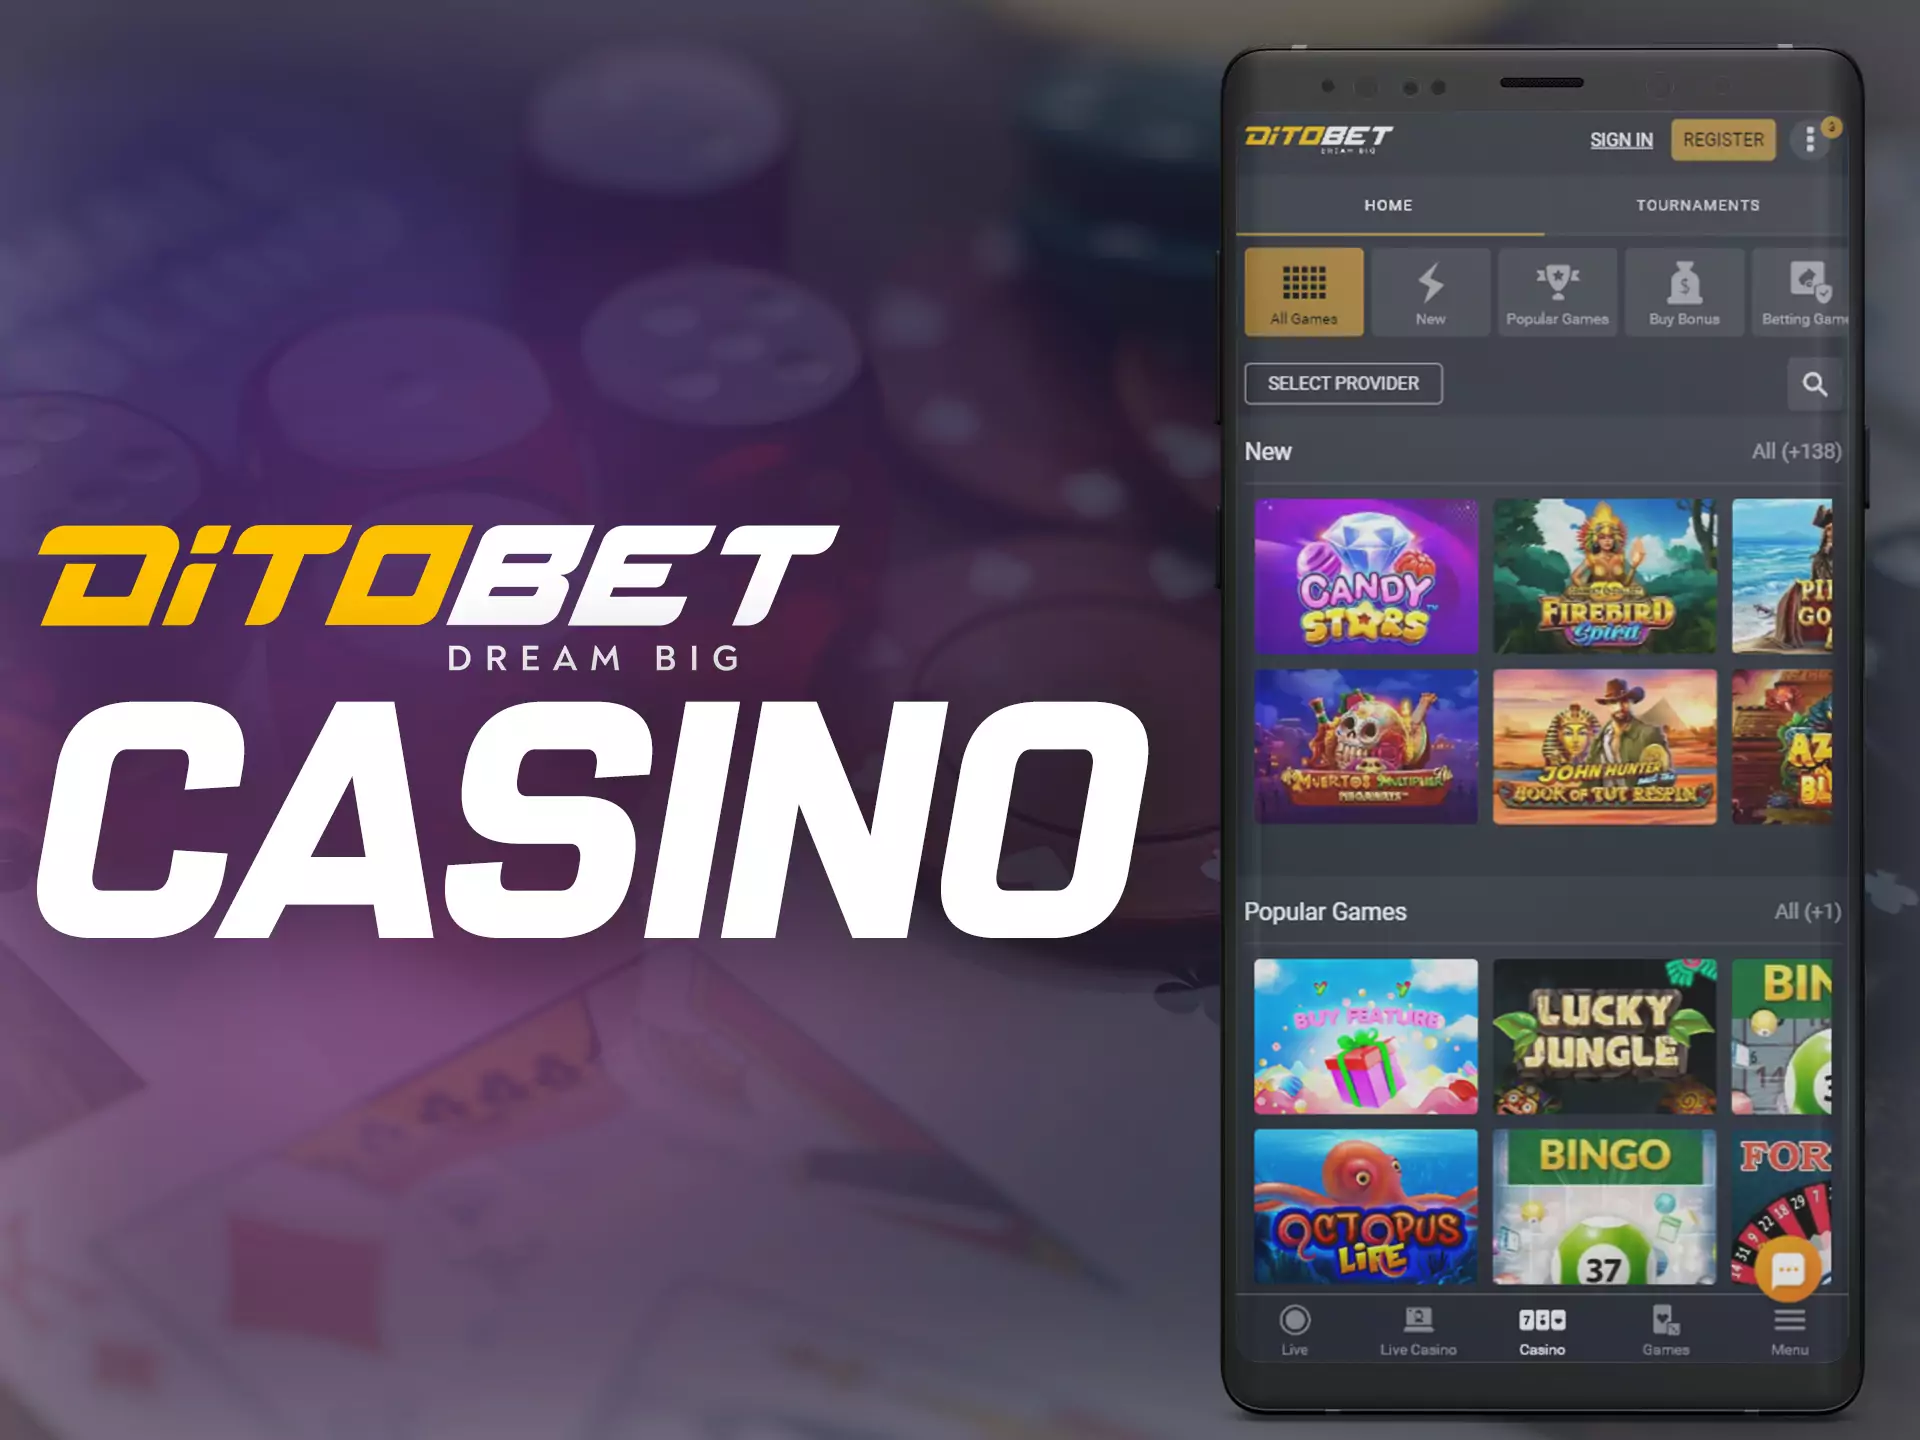 Ditobet casino app offer players many attractions, play with pleasure.